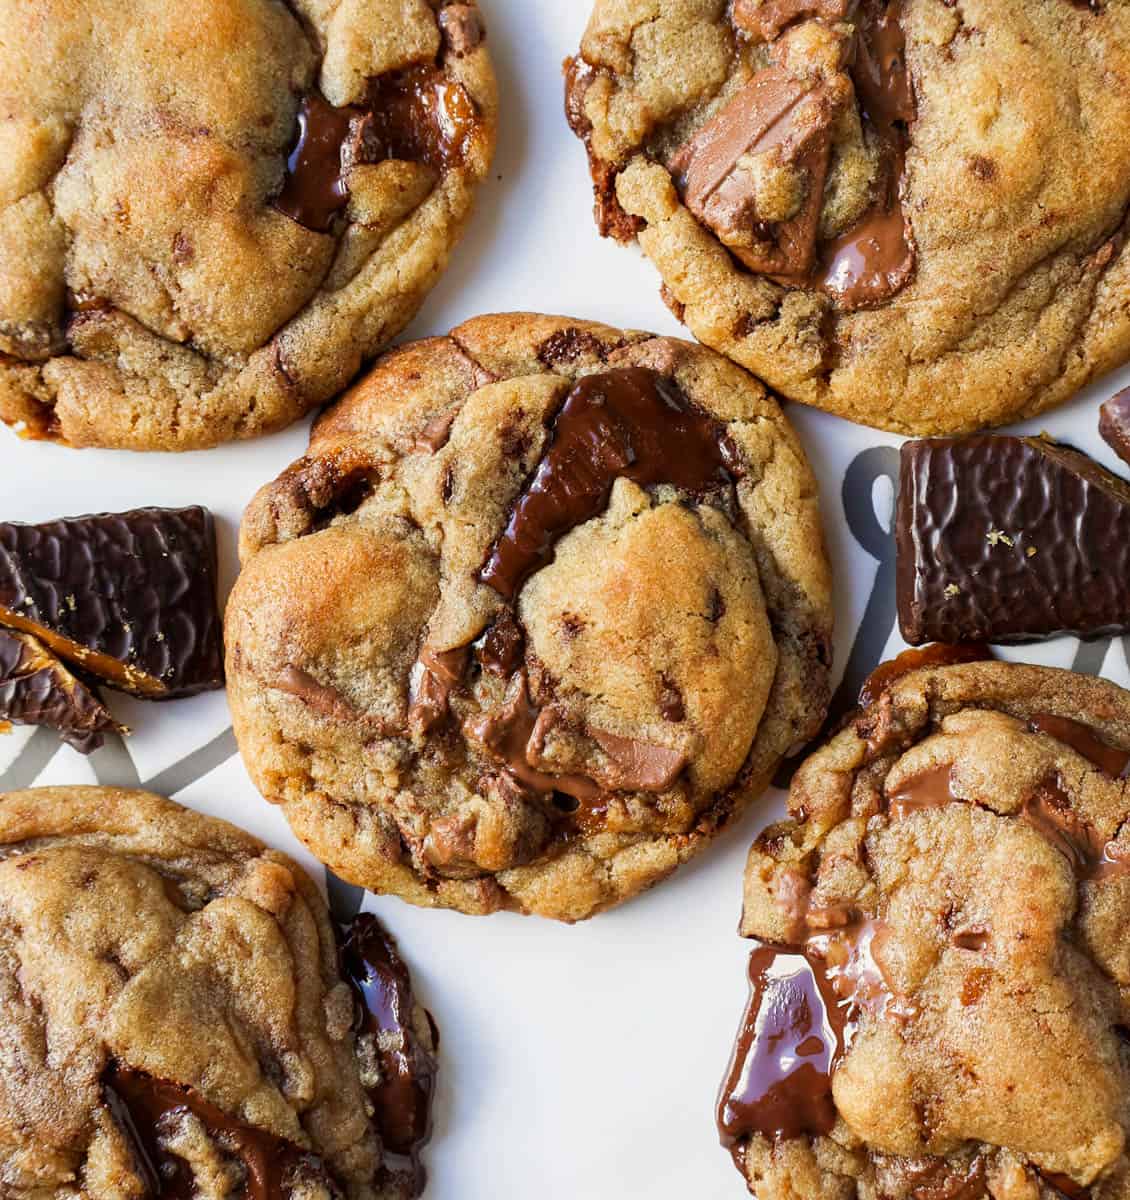 https://www.modernhoney.com/wp-content/uploads/2023/04/Browned-Butter-Toffee-Chocolate-Chip-Cookies-12.jpg